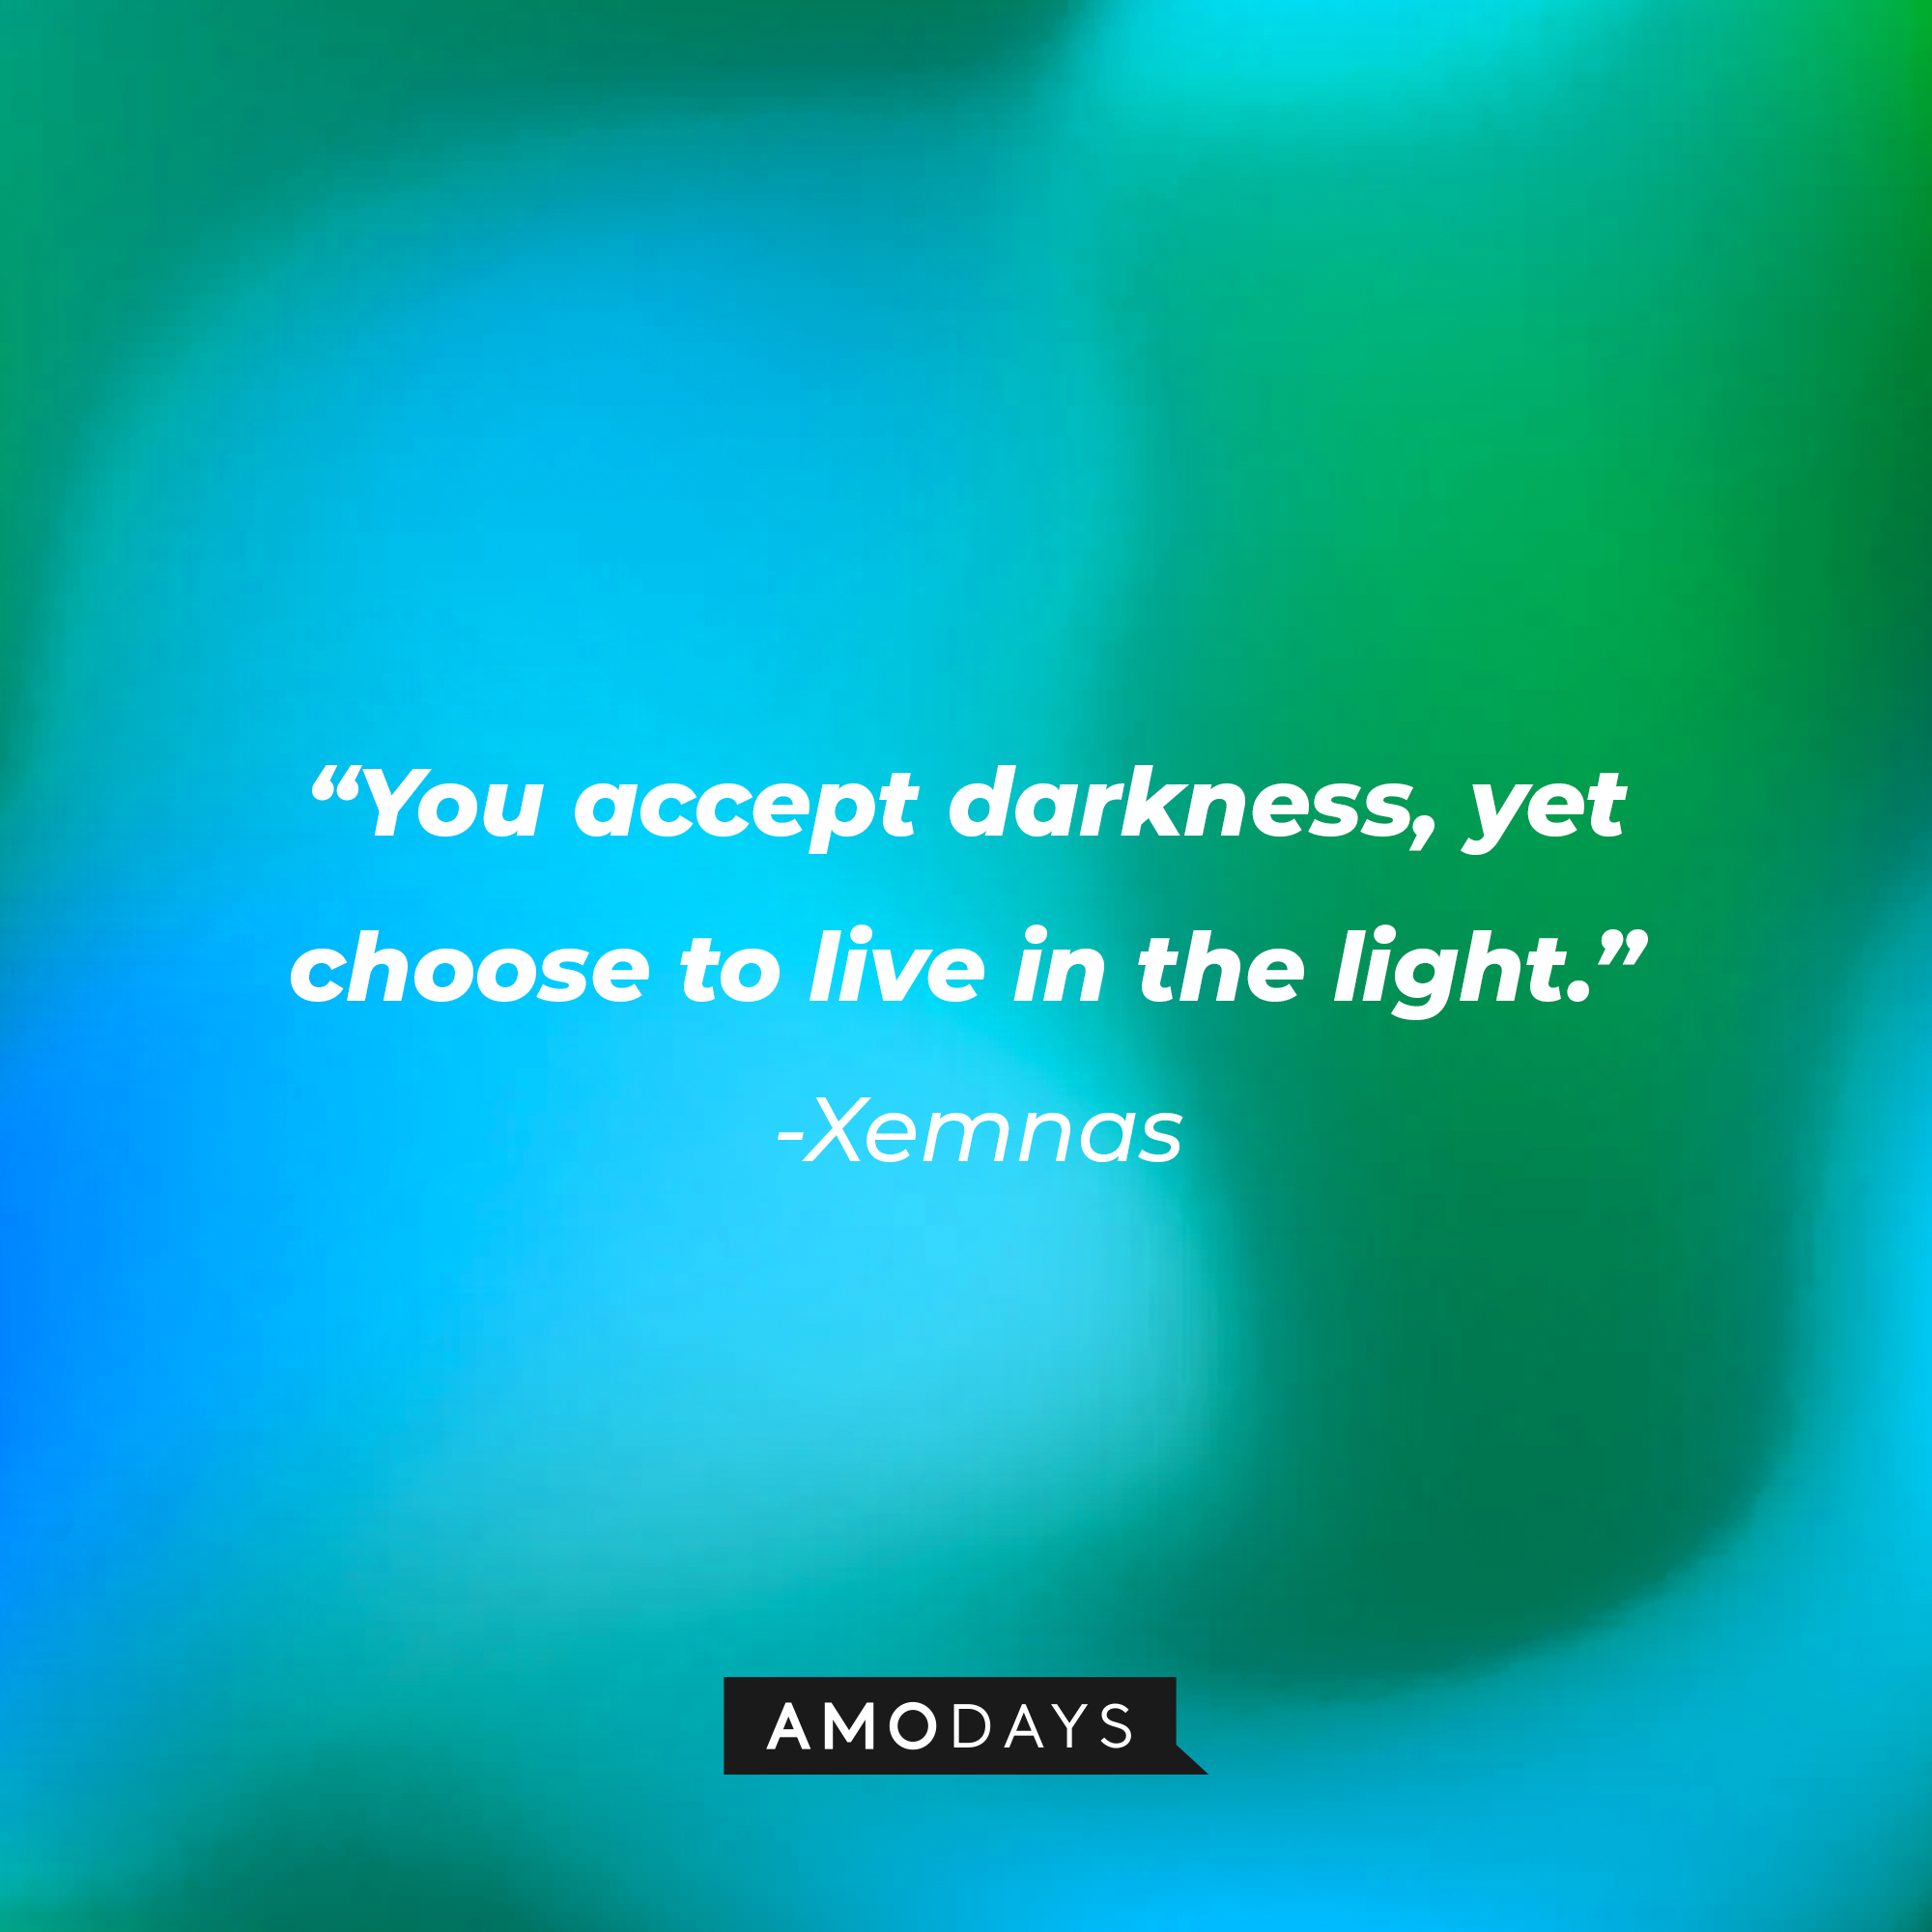 Xenmas’ quote: “You accept darkness, yet choose to live in the light.” | Source: AmoDays